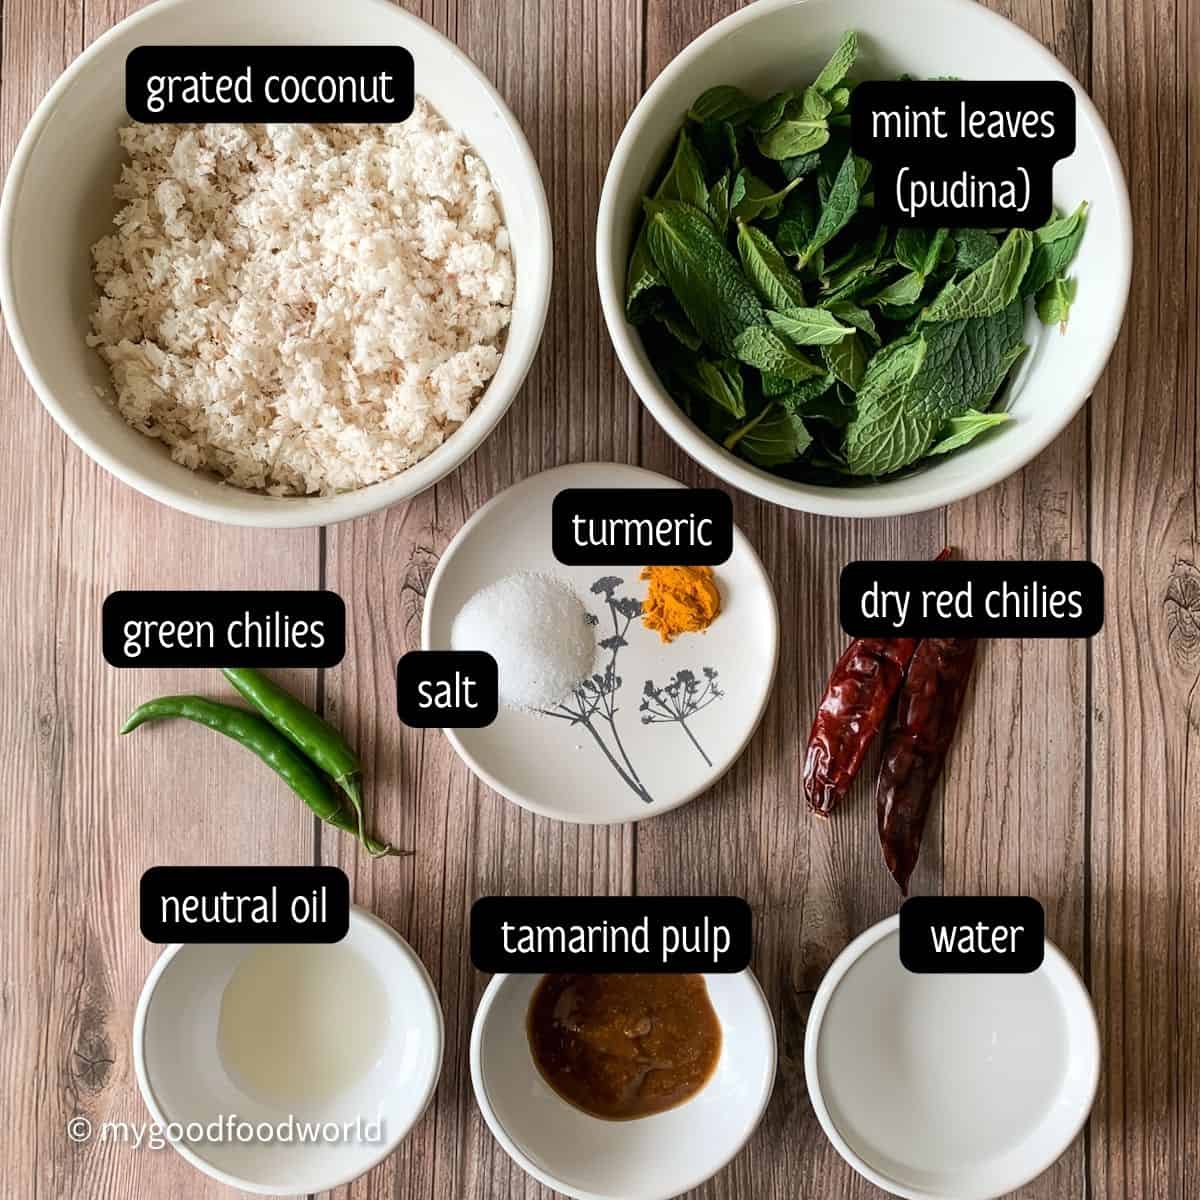 Mint leaves, grated coconut, oil, tamarind pulp, water, two green chilies, and two dry red chilies placed in white bowls and arranged on a brown textured background.